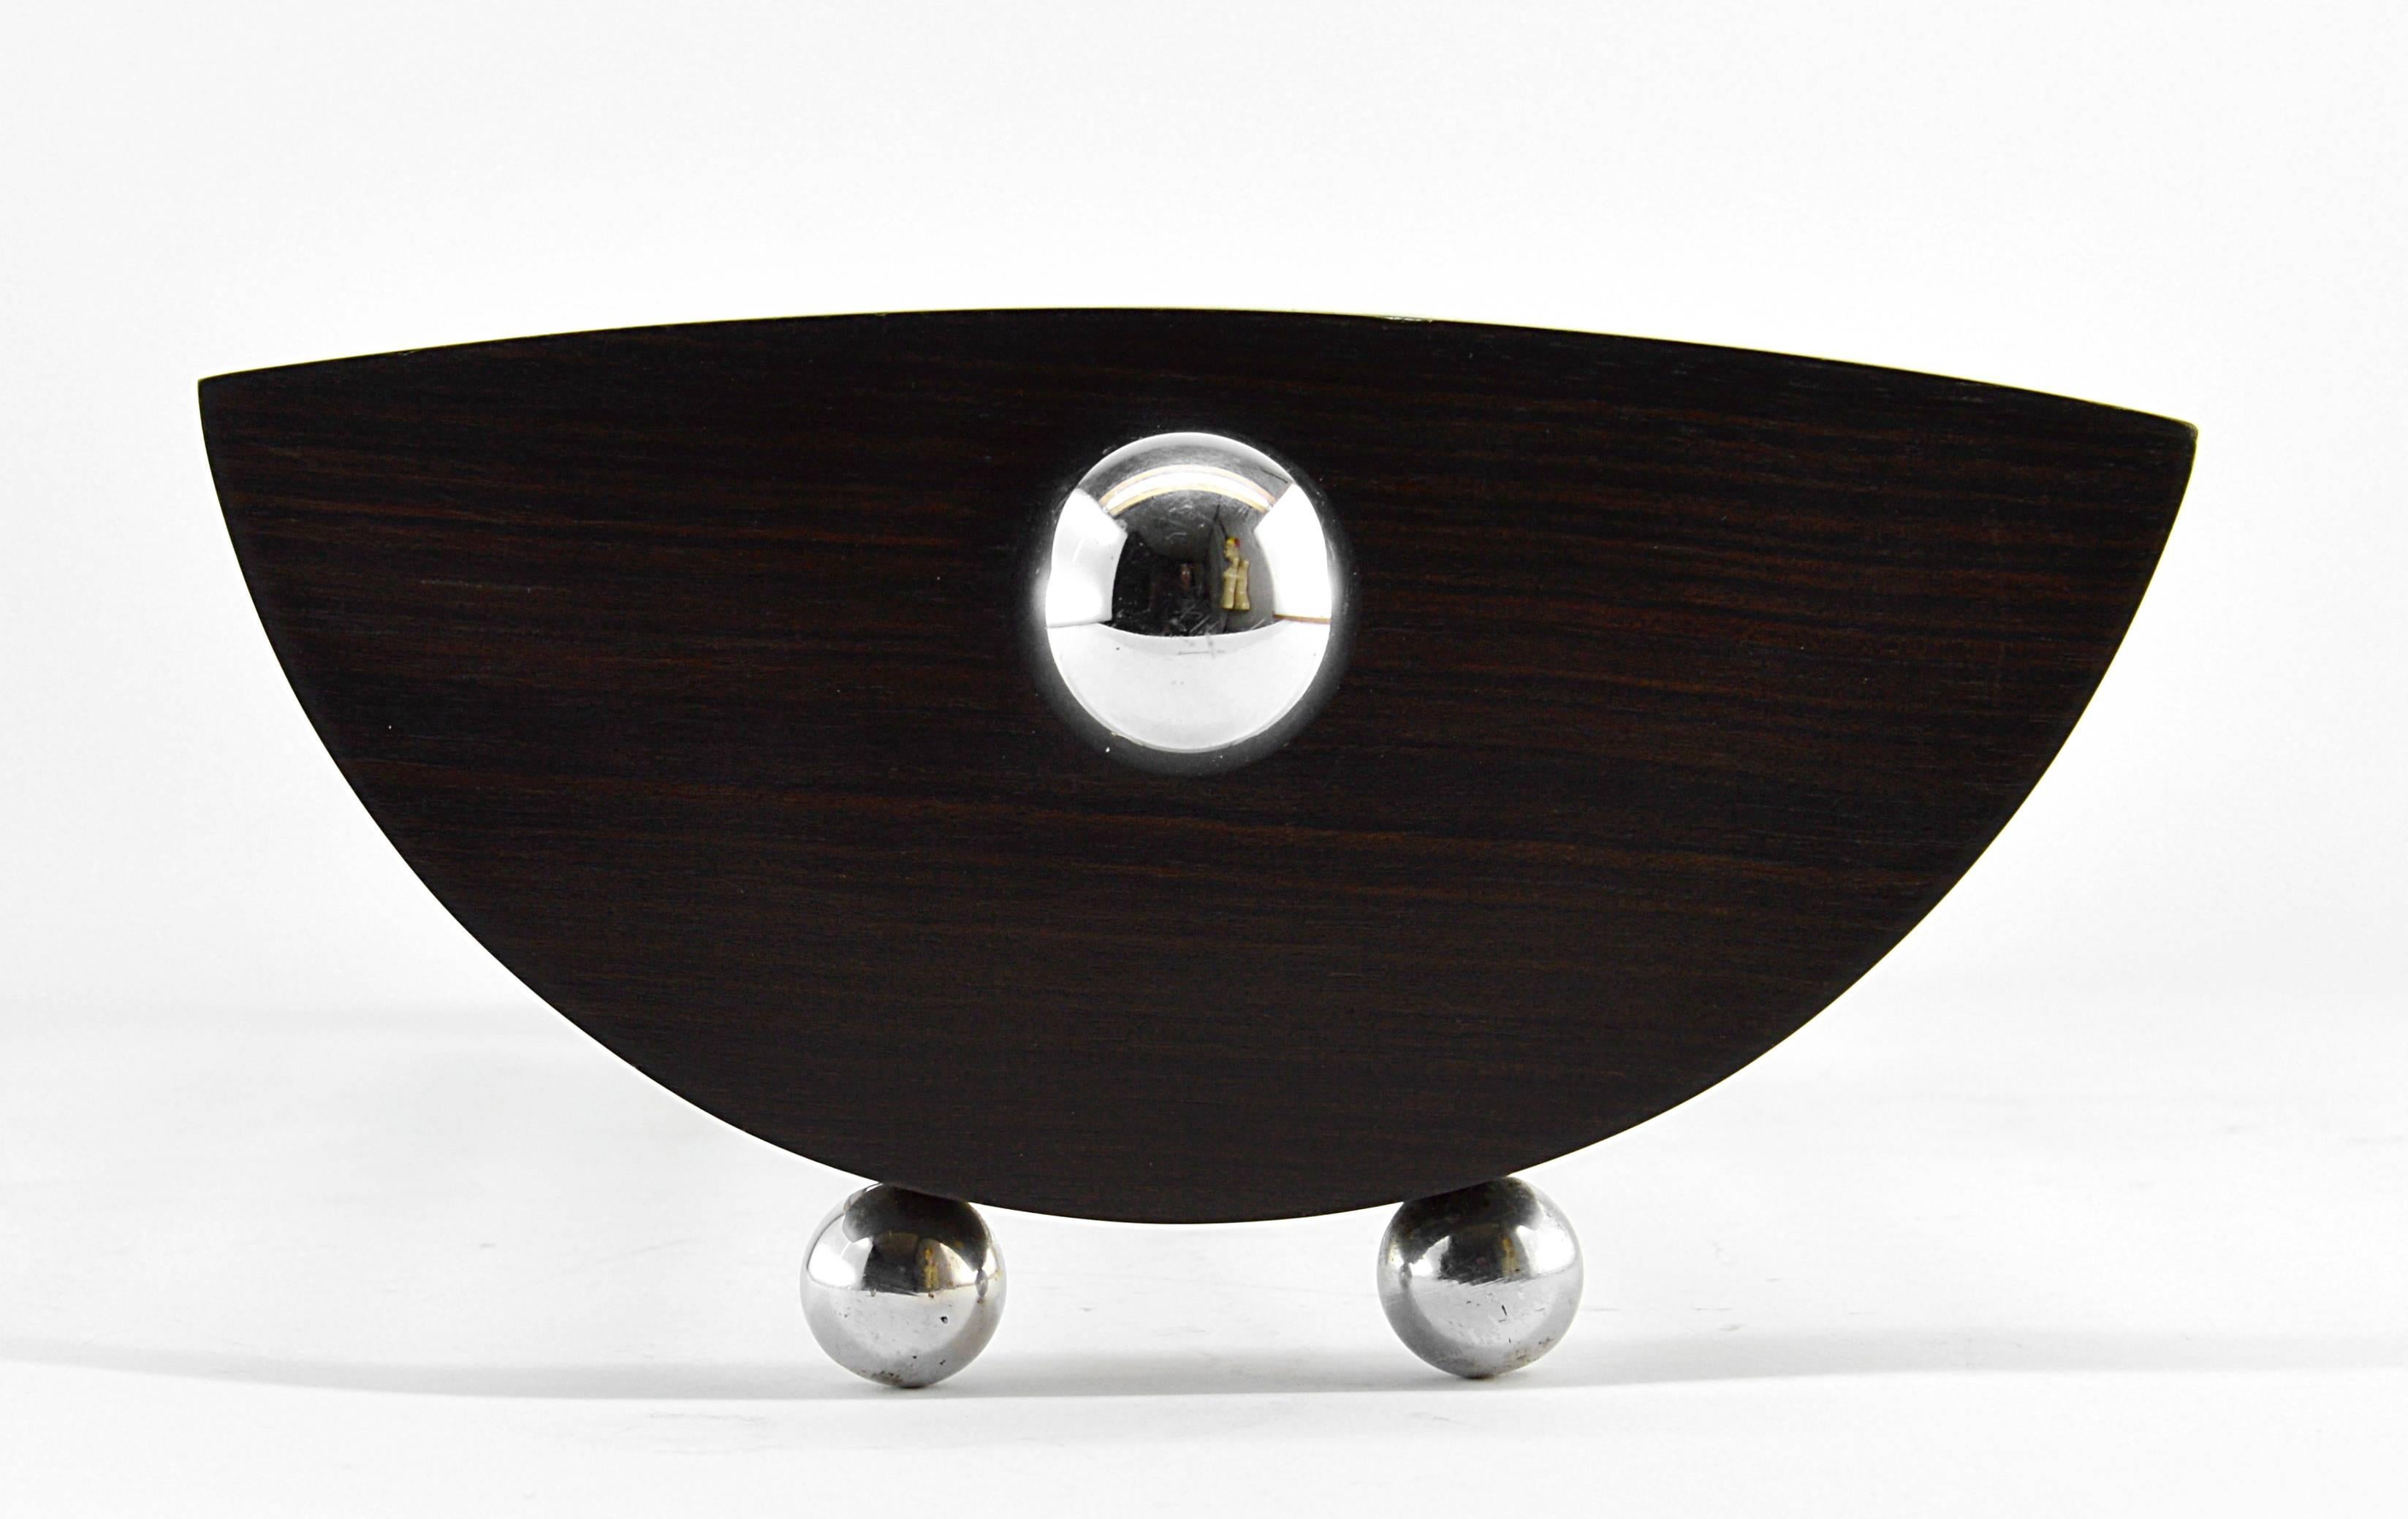 French Art Deco modernist fruit bowl, circa 1930. Modernism era. Macassar wood and chromed rods and balls.

Welcome to our Platinum 1stDibs store! To be informed of our frequent new arrivals, follow us! To do this, click on the 